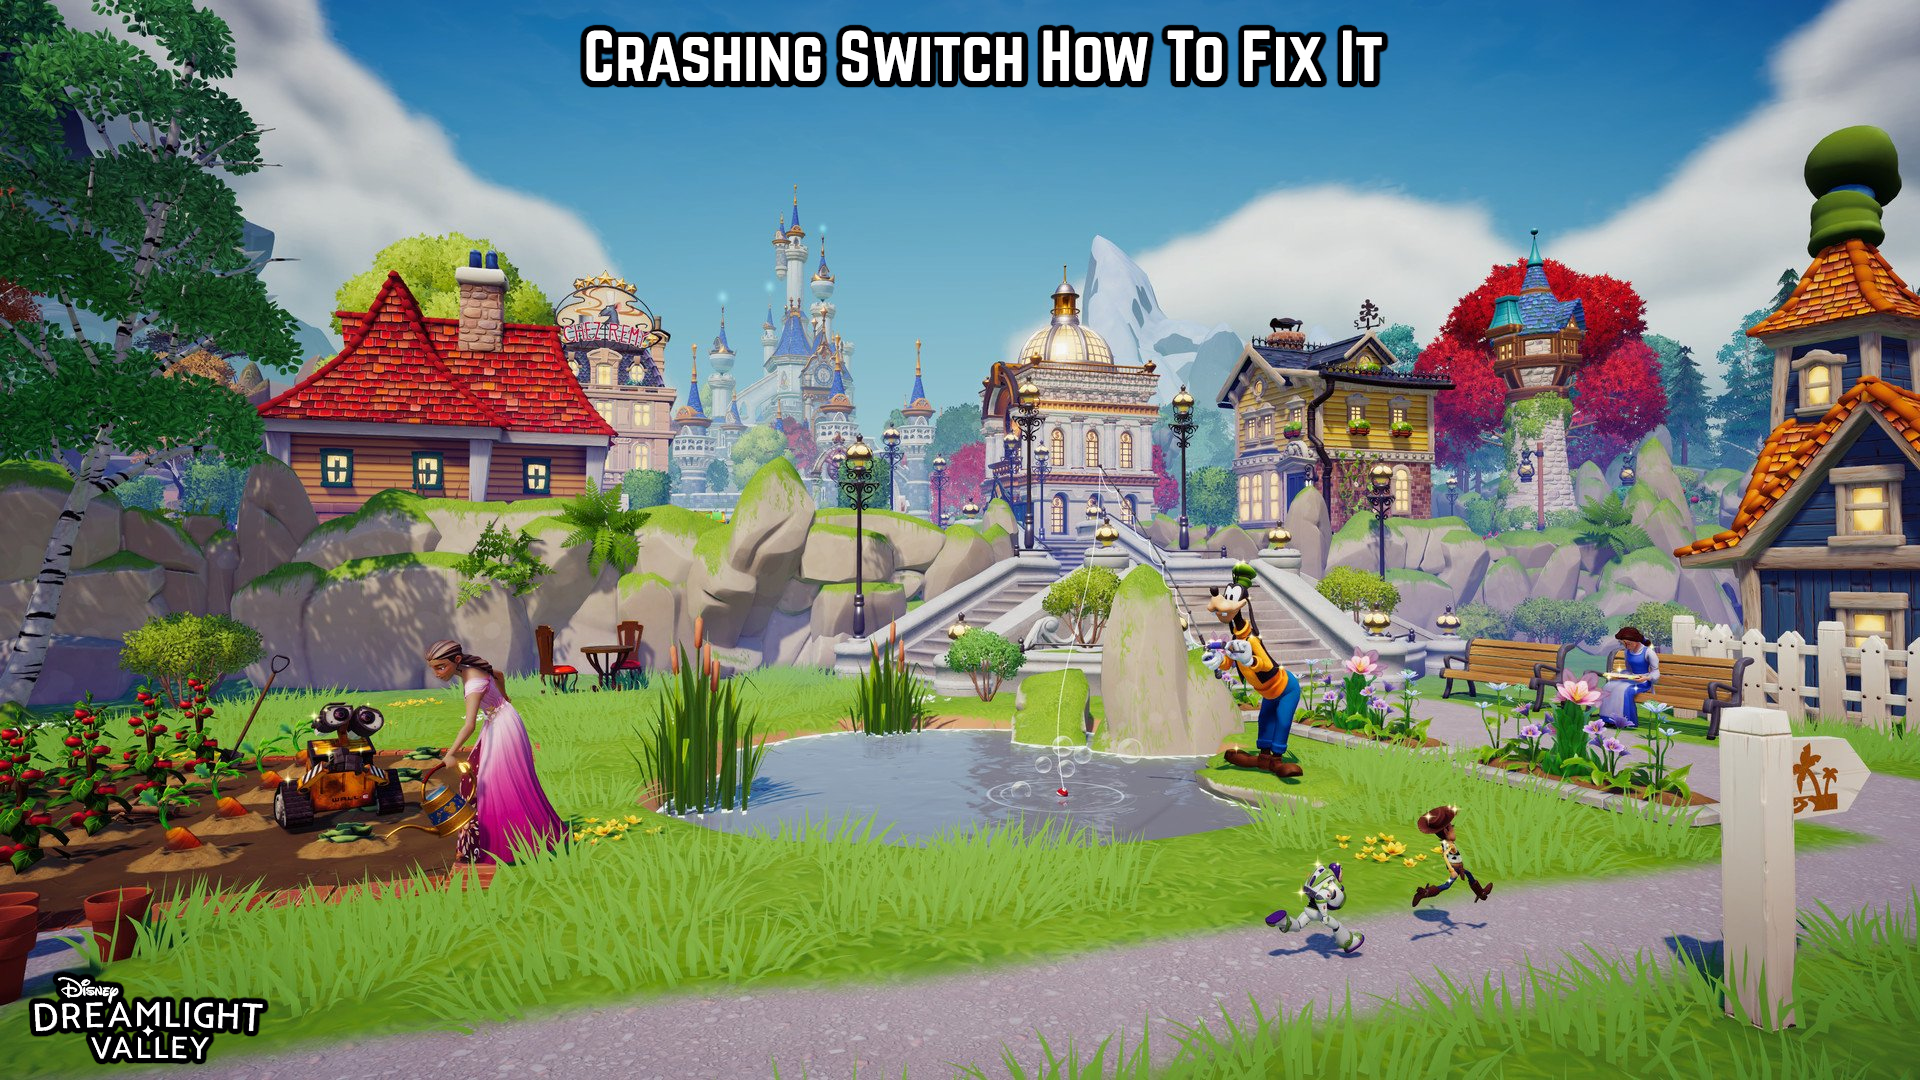 You are currently viewing Dreamlight Valley Crashing Switch How To Fix It